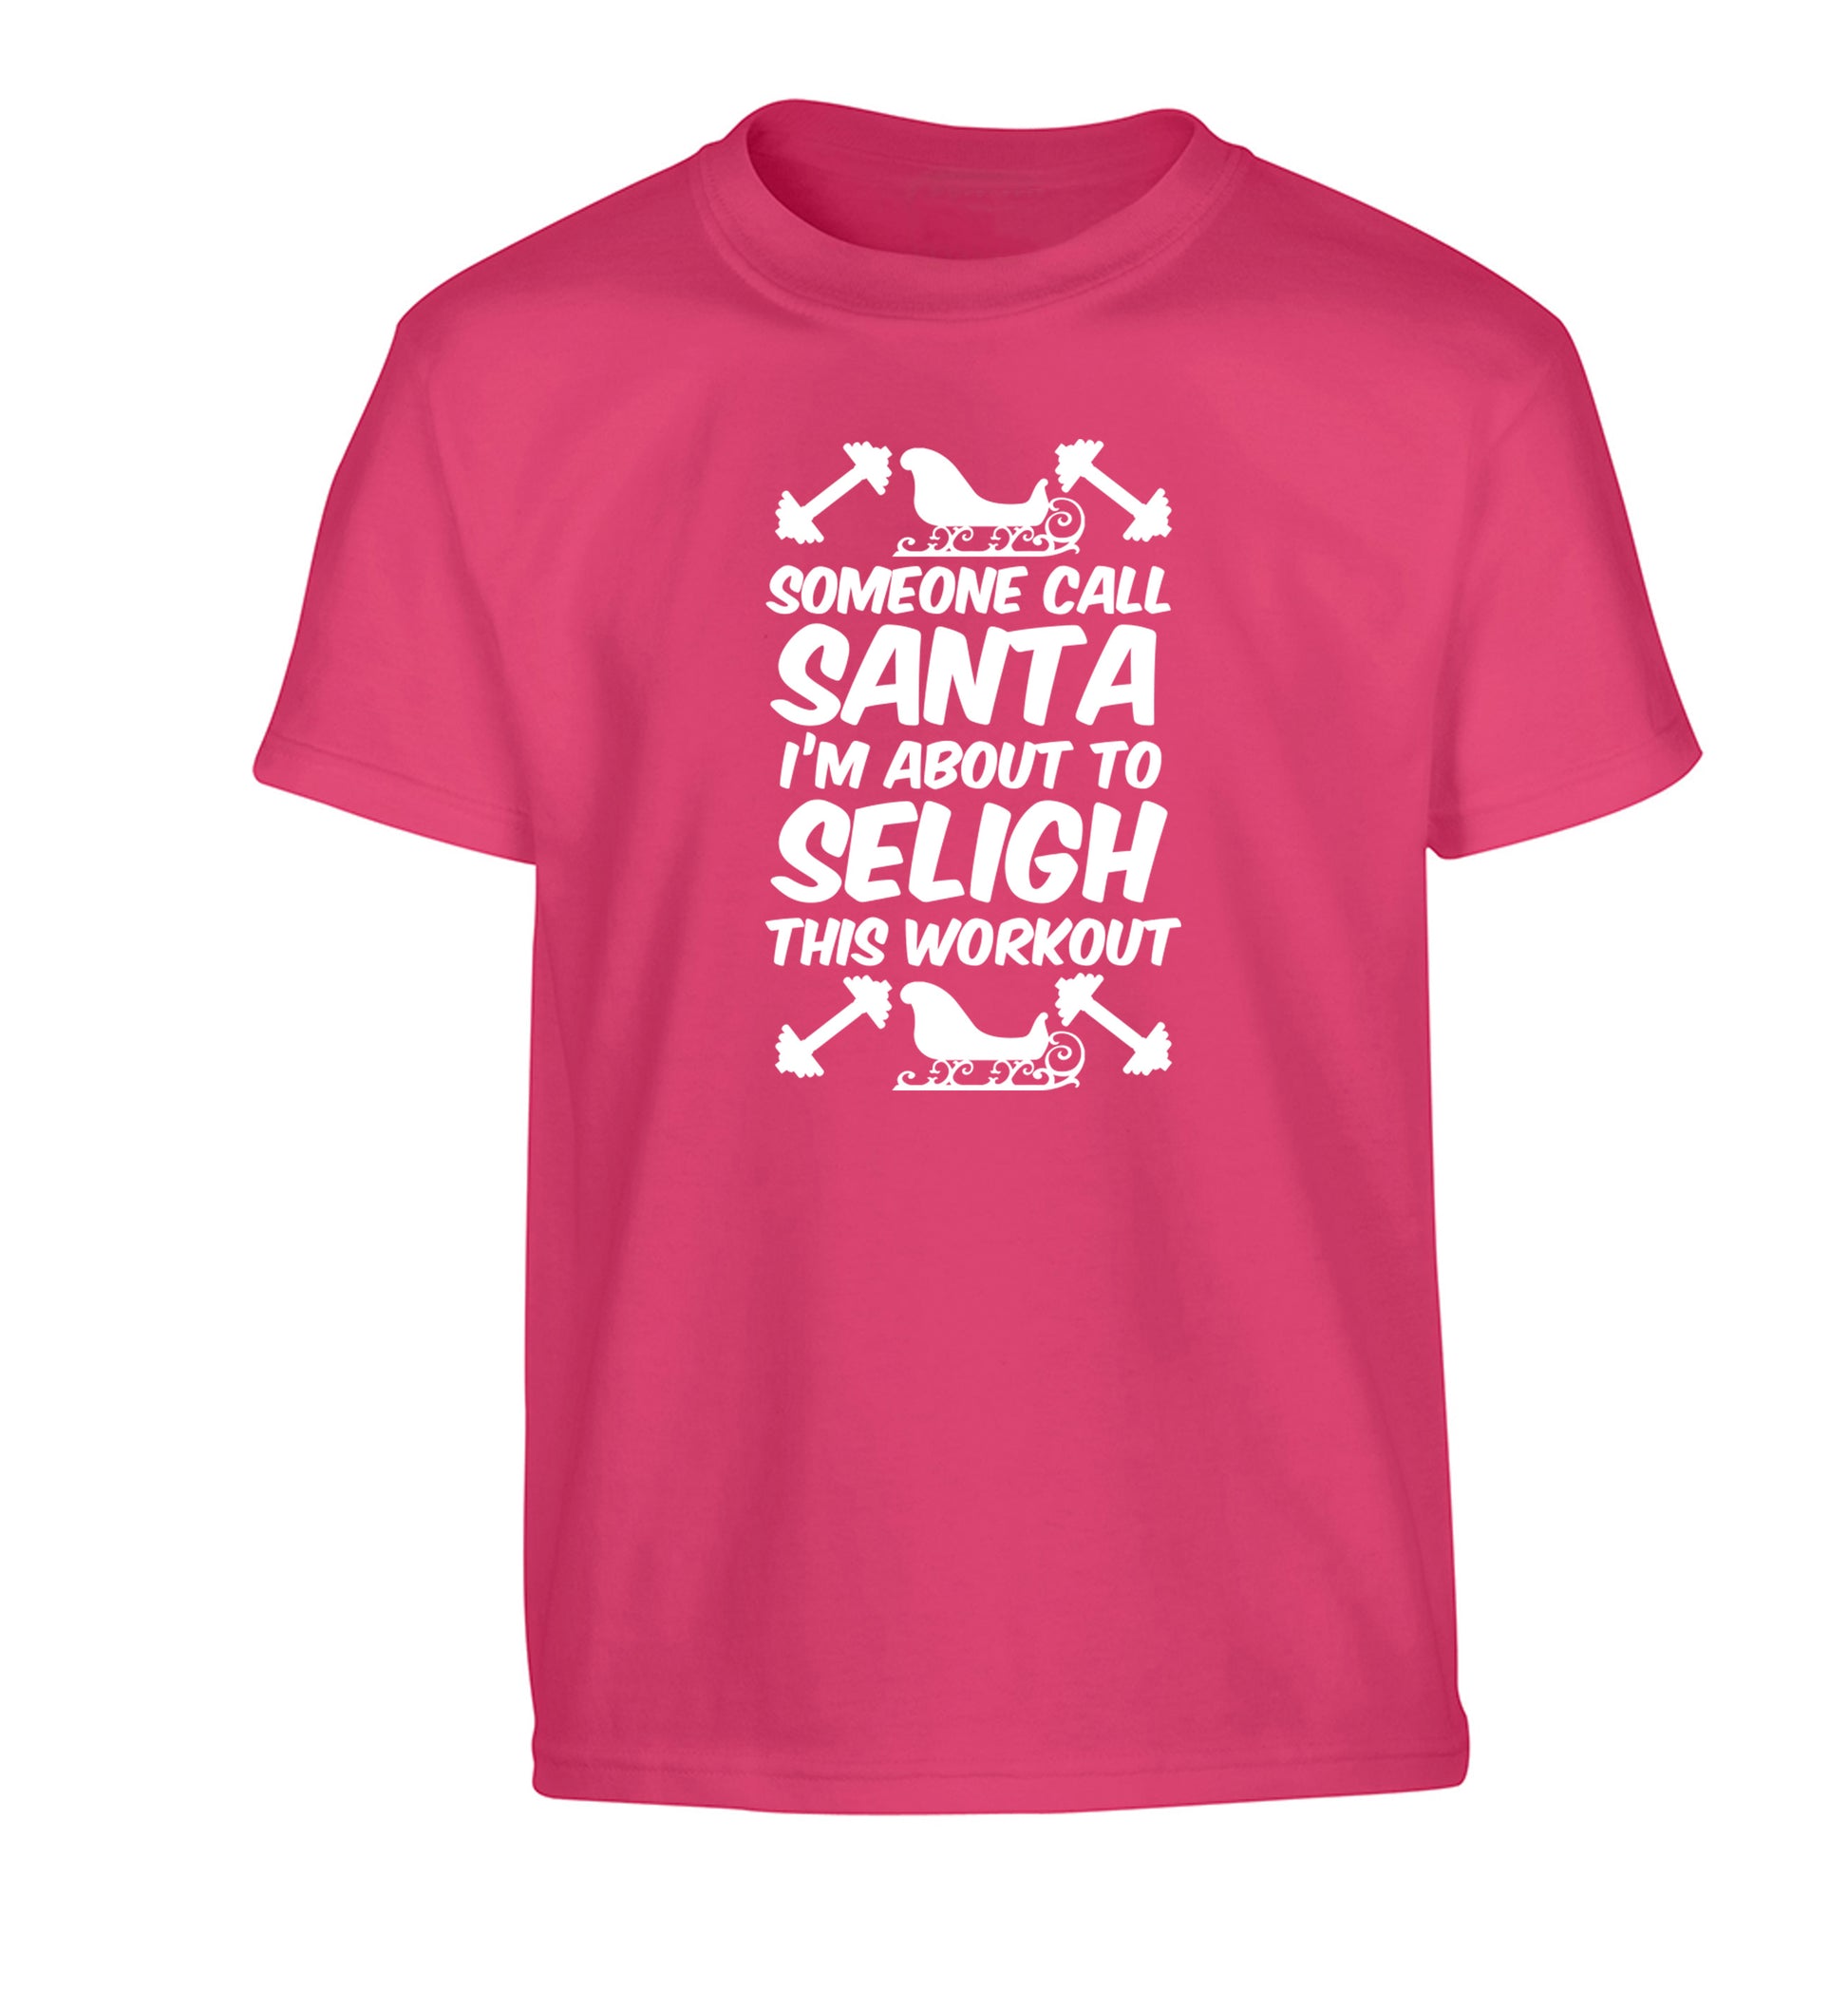 Someone call santa, I'm about to sleigh this workout Children's pink Tshirt 12-14 Years